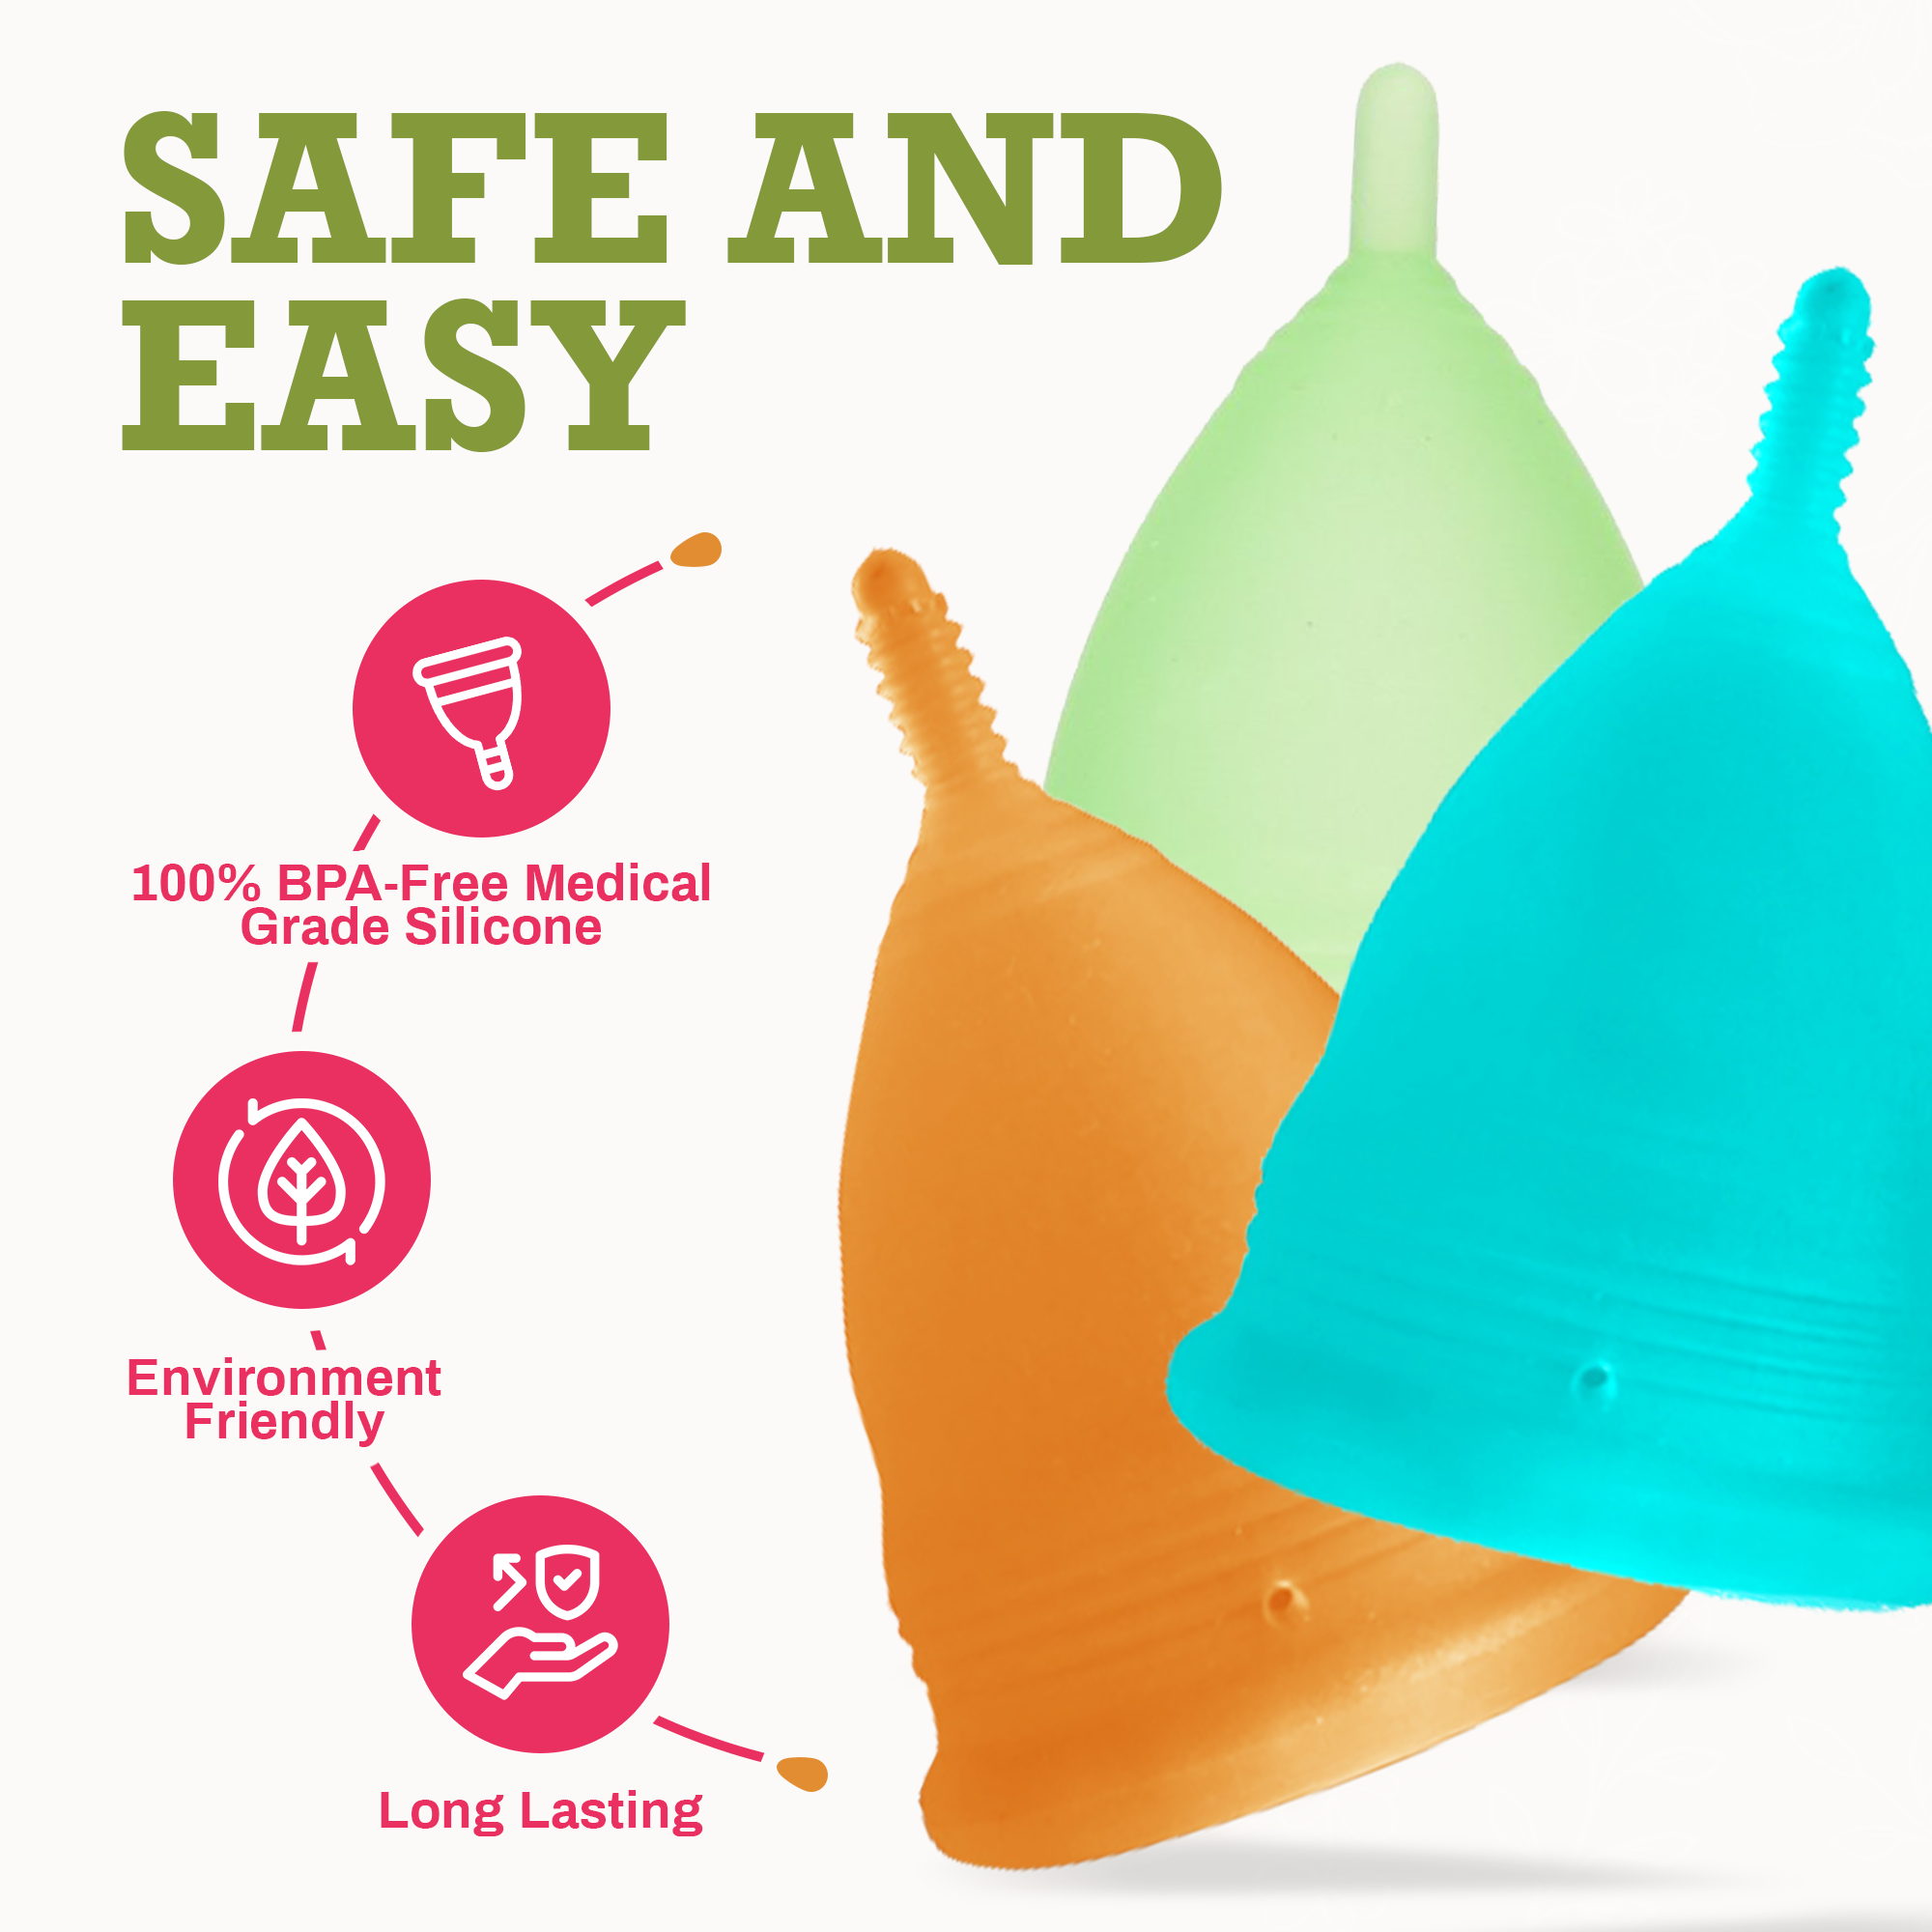 Blossom Cup has Been Featured on Oprah Daily As Best and most inexpensive Menstrual Cup on the Market.